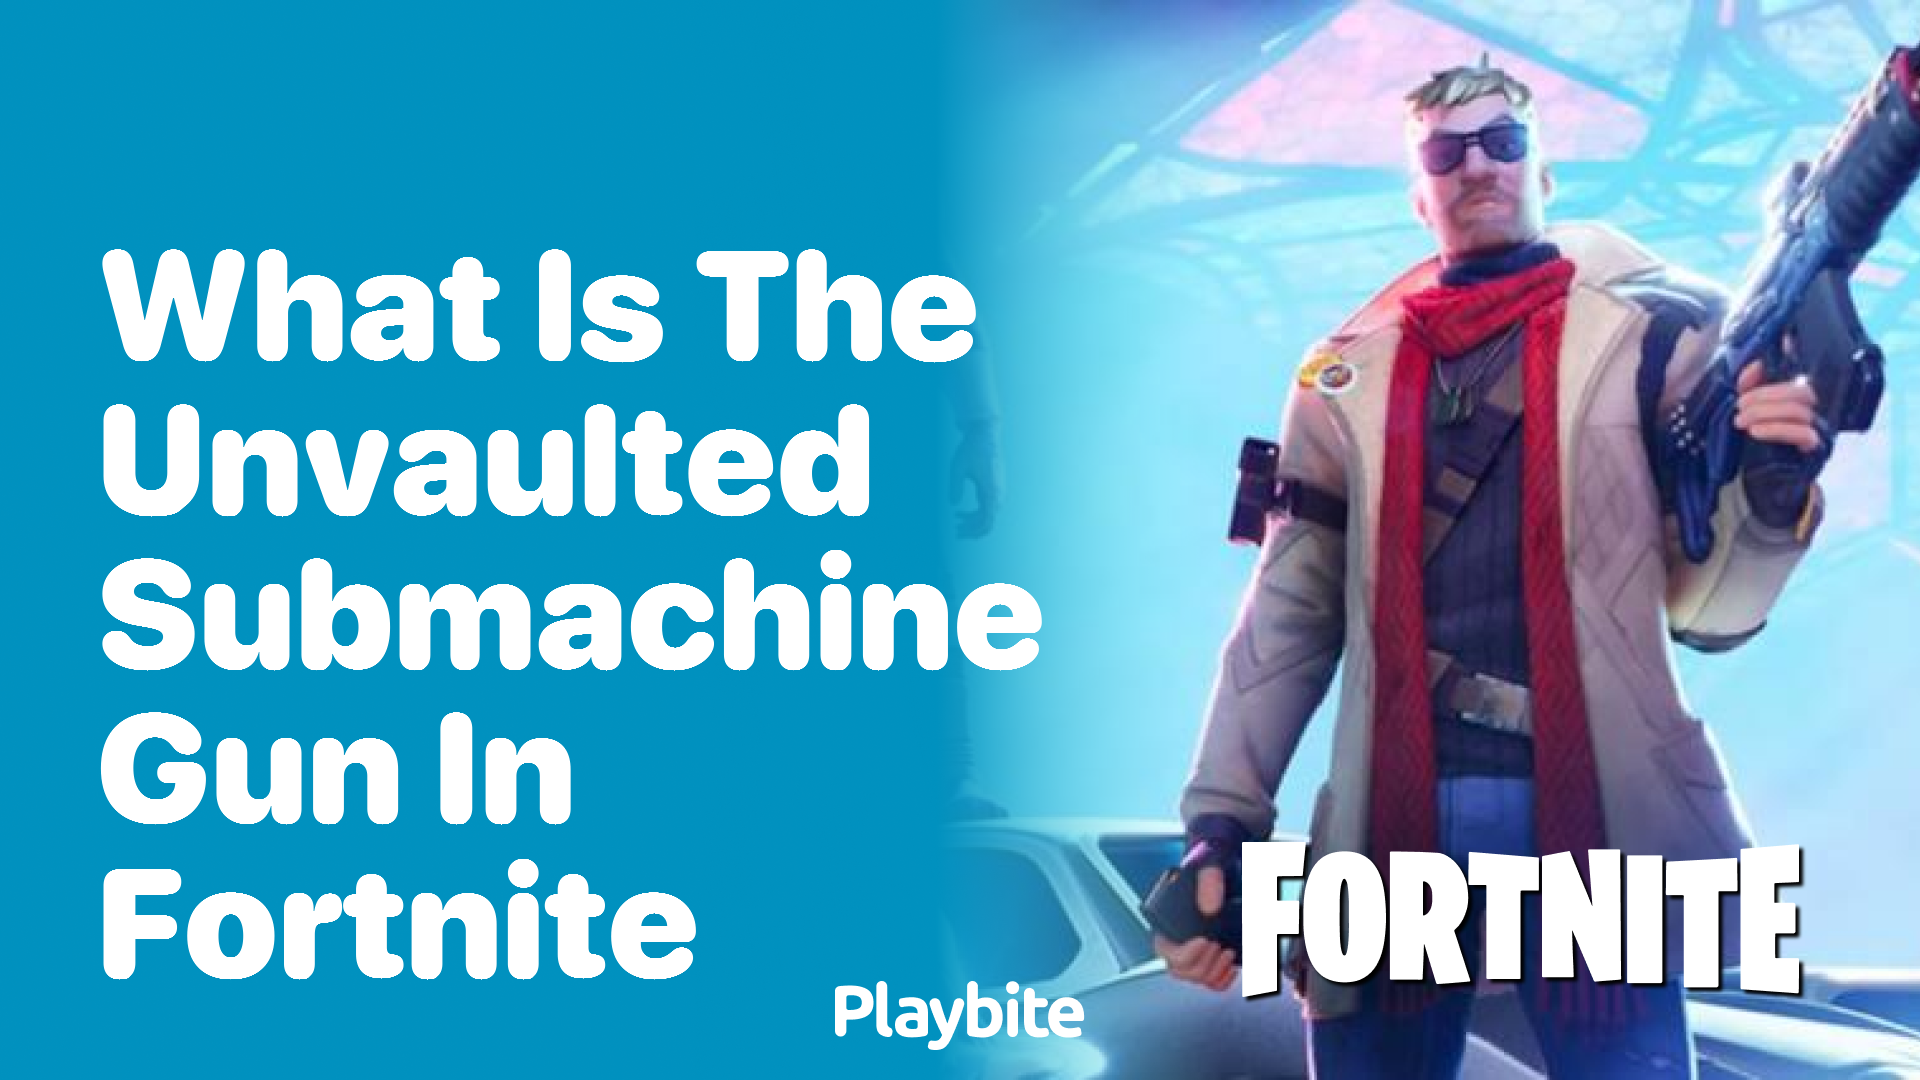 What Is the Unvaulted Submachine Gun in Fortnite?